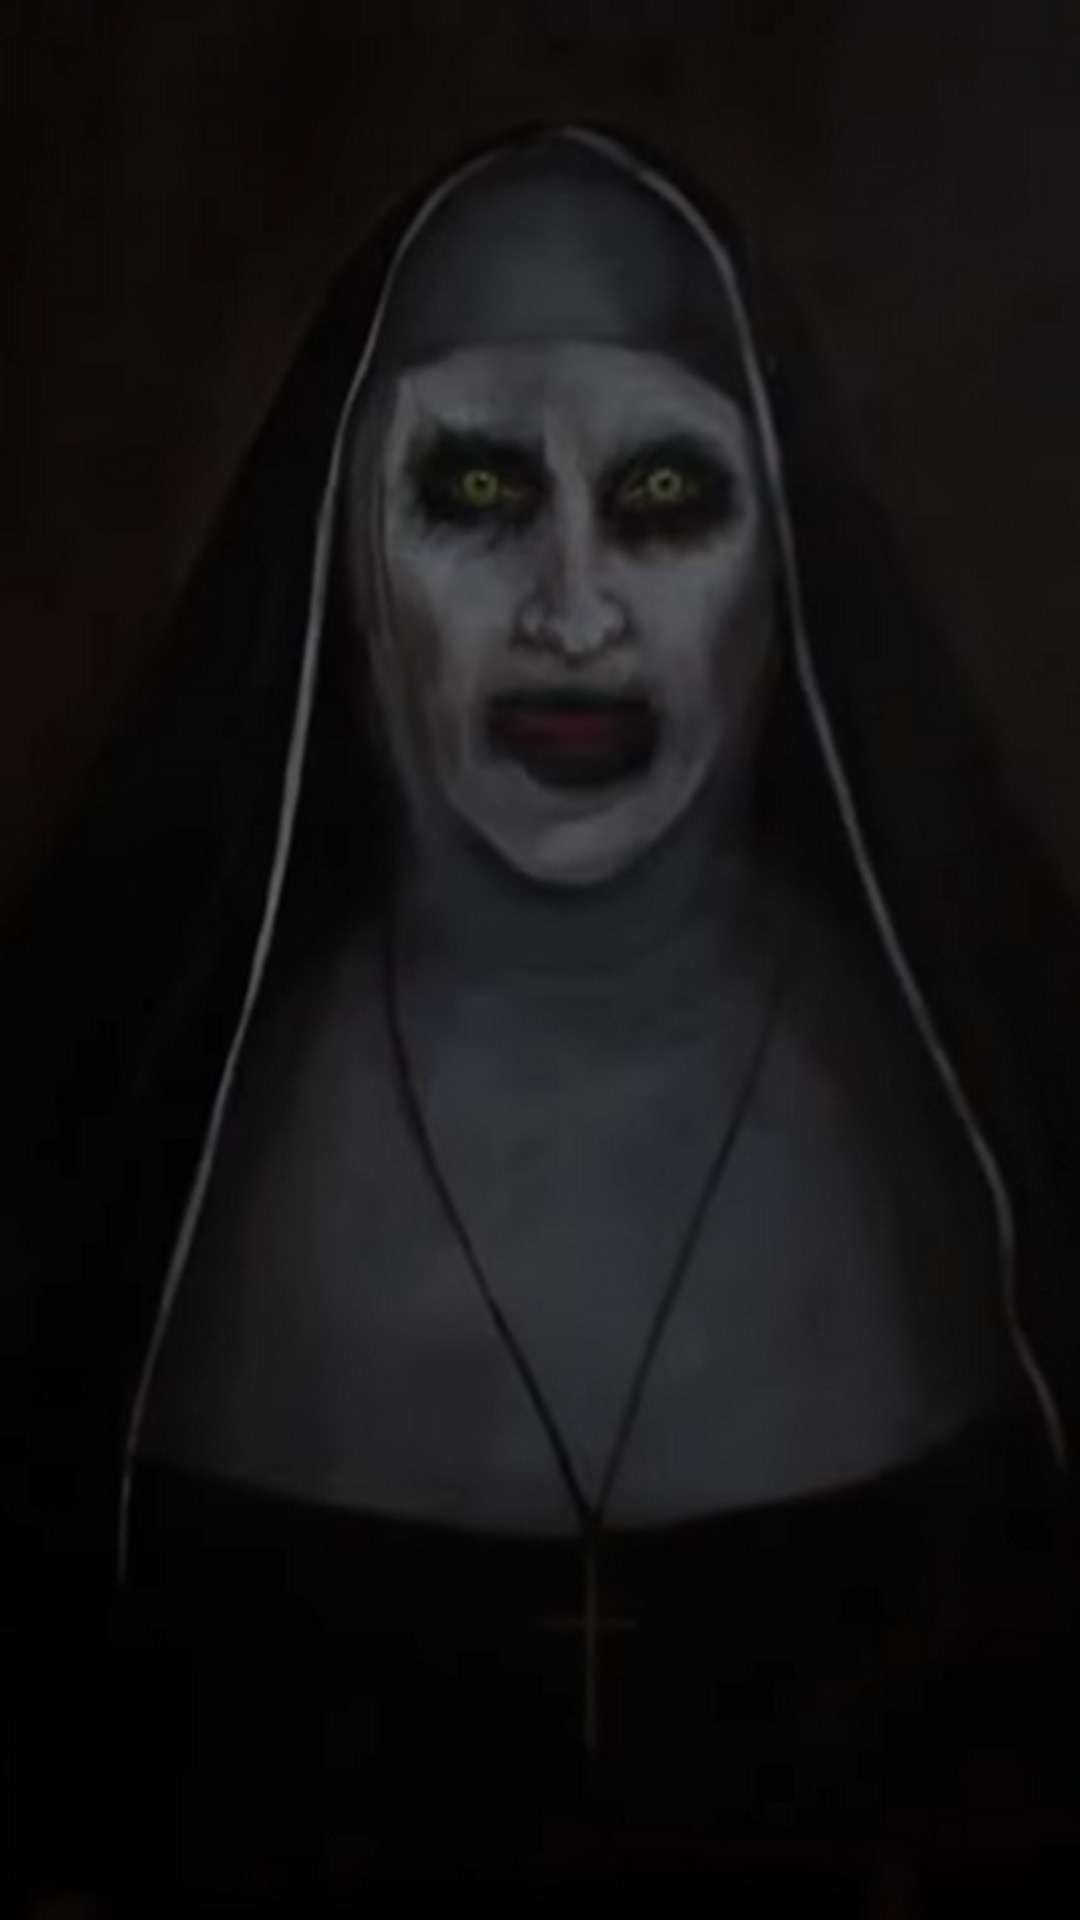 iPhone Wallpaper The Nun Valak with image resolution 1080x1920 pixel. You can make this wallpaper for your iPhone 5, 6, 7, 8, X backgrounds, Mobile Screensaver, or iPad Lock Screen